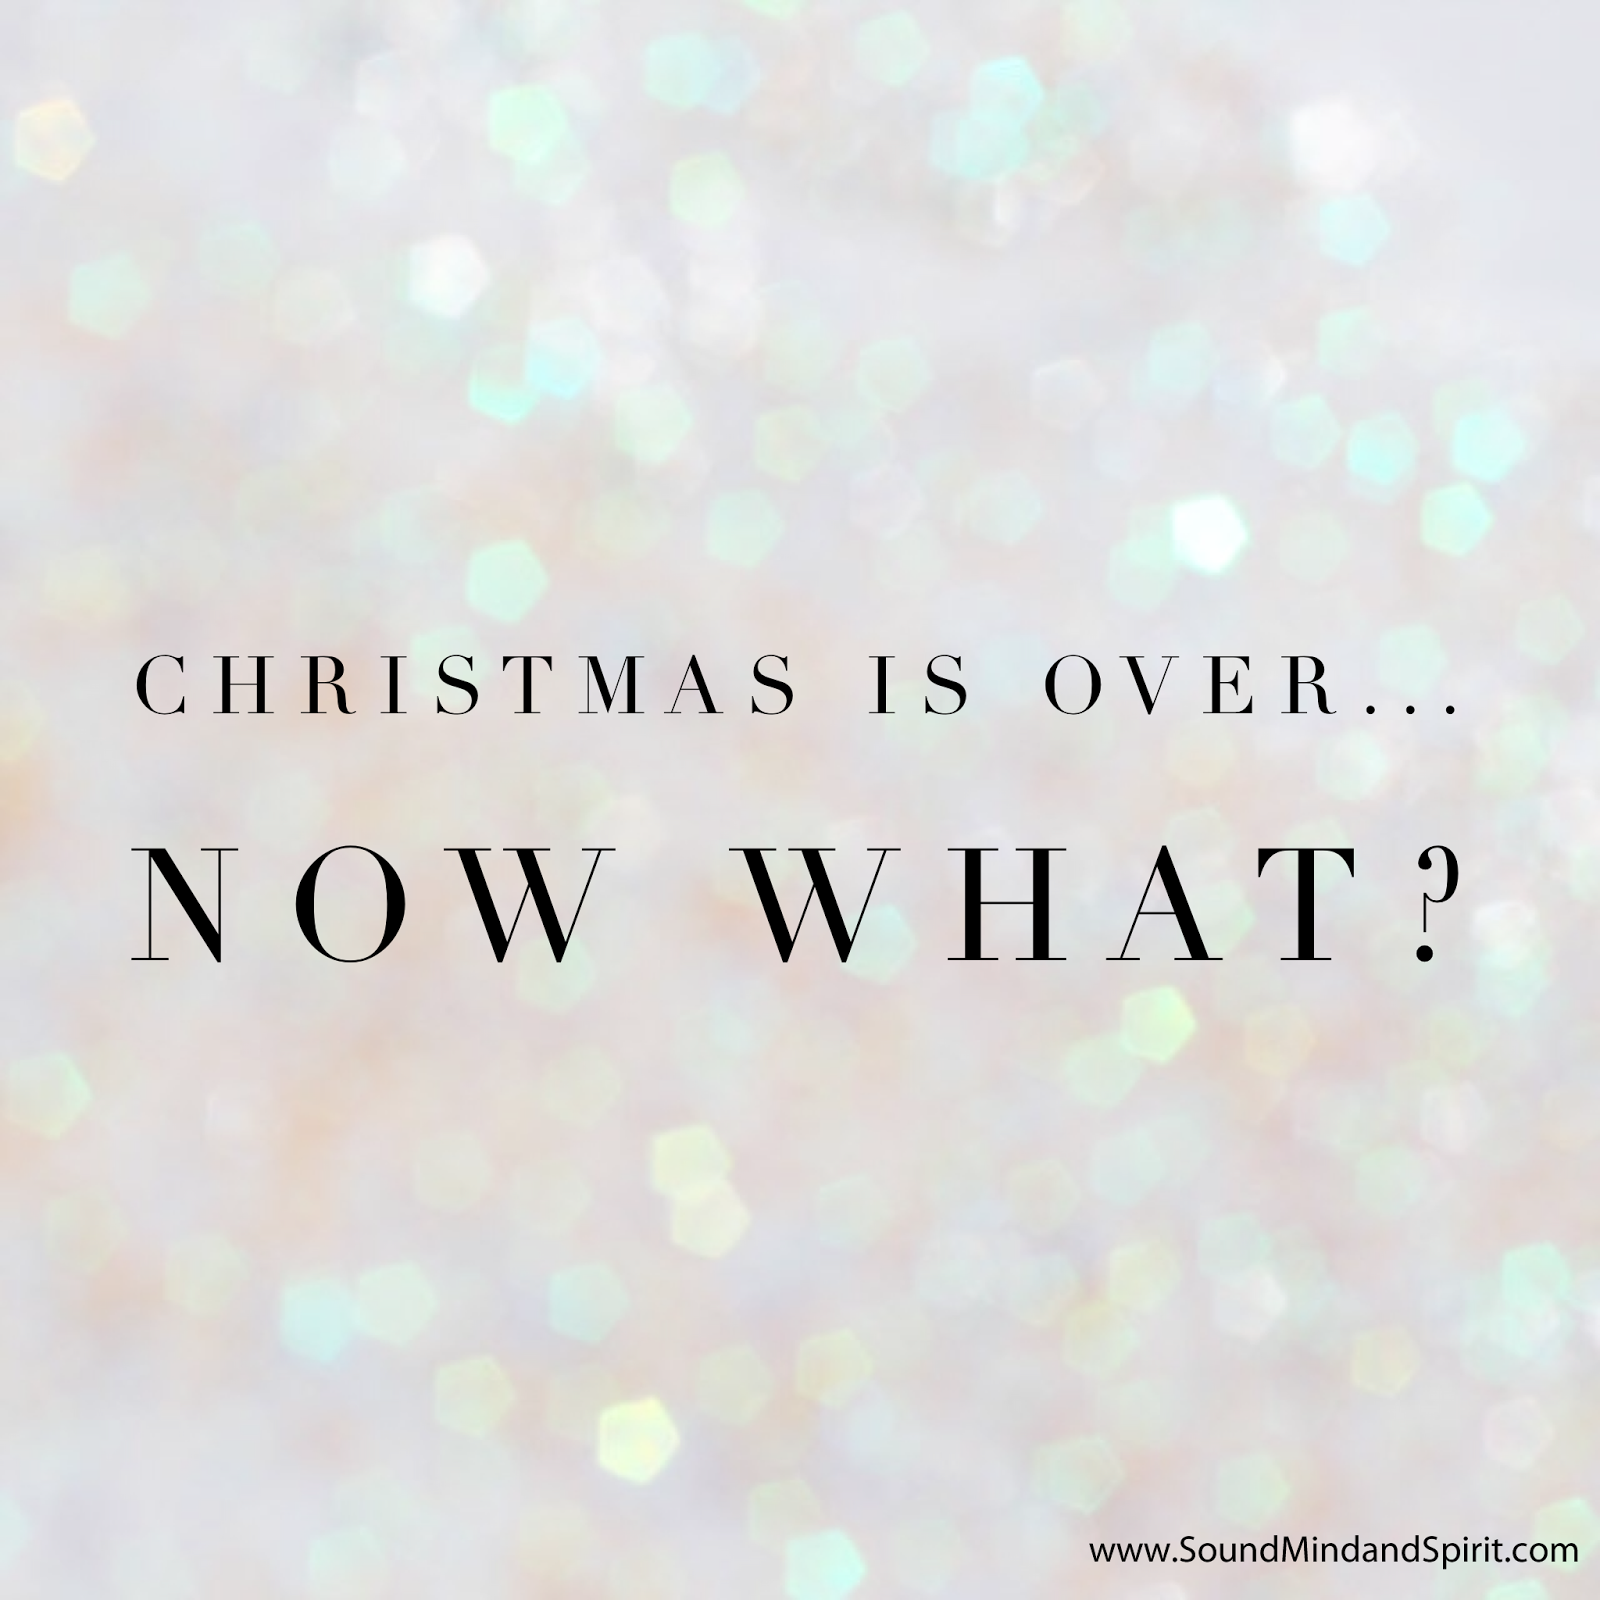 Christmas is over, Now What?